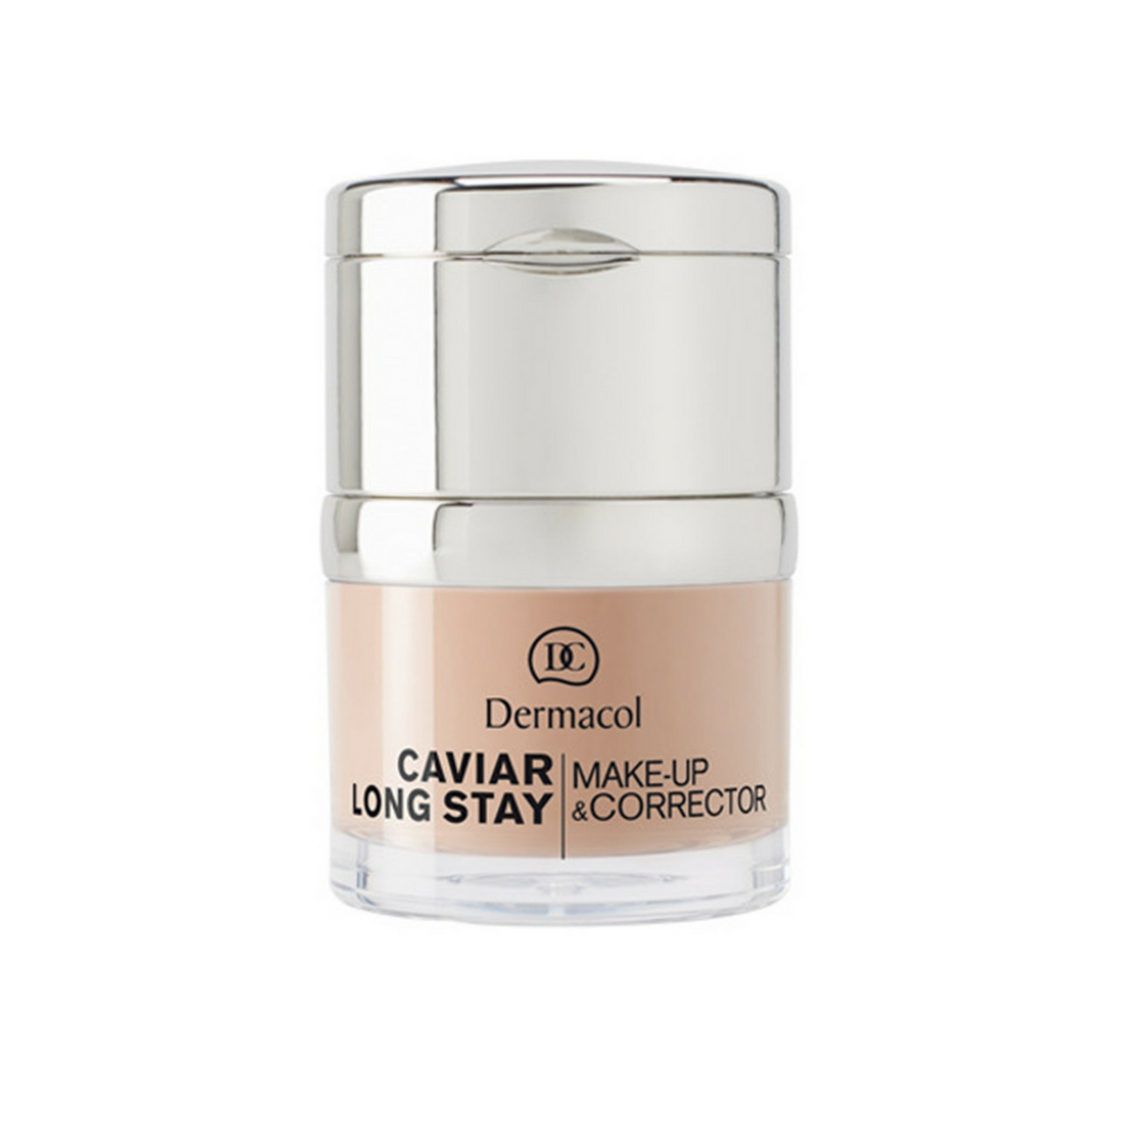 Dermacol Caviar long stay make-up & corrector